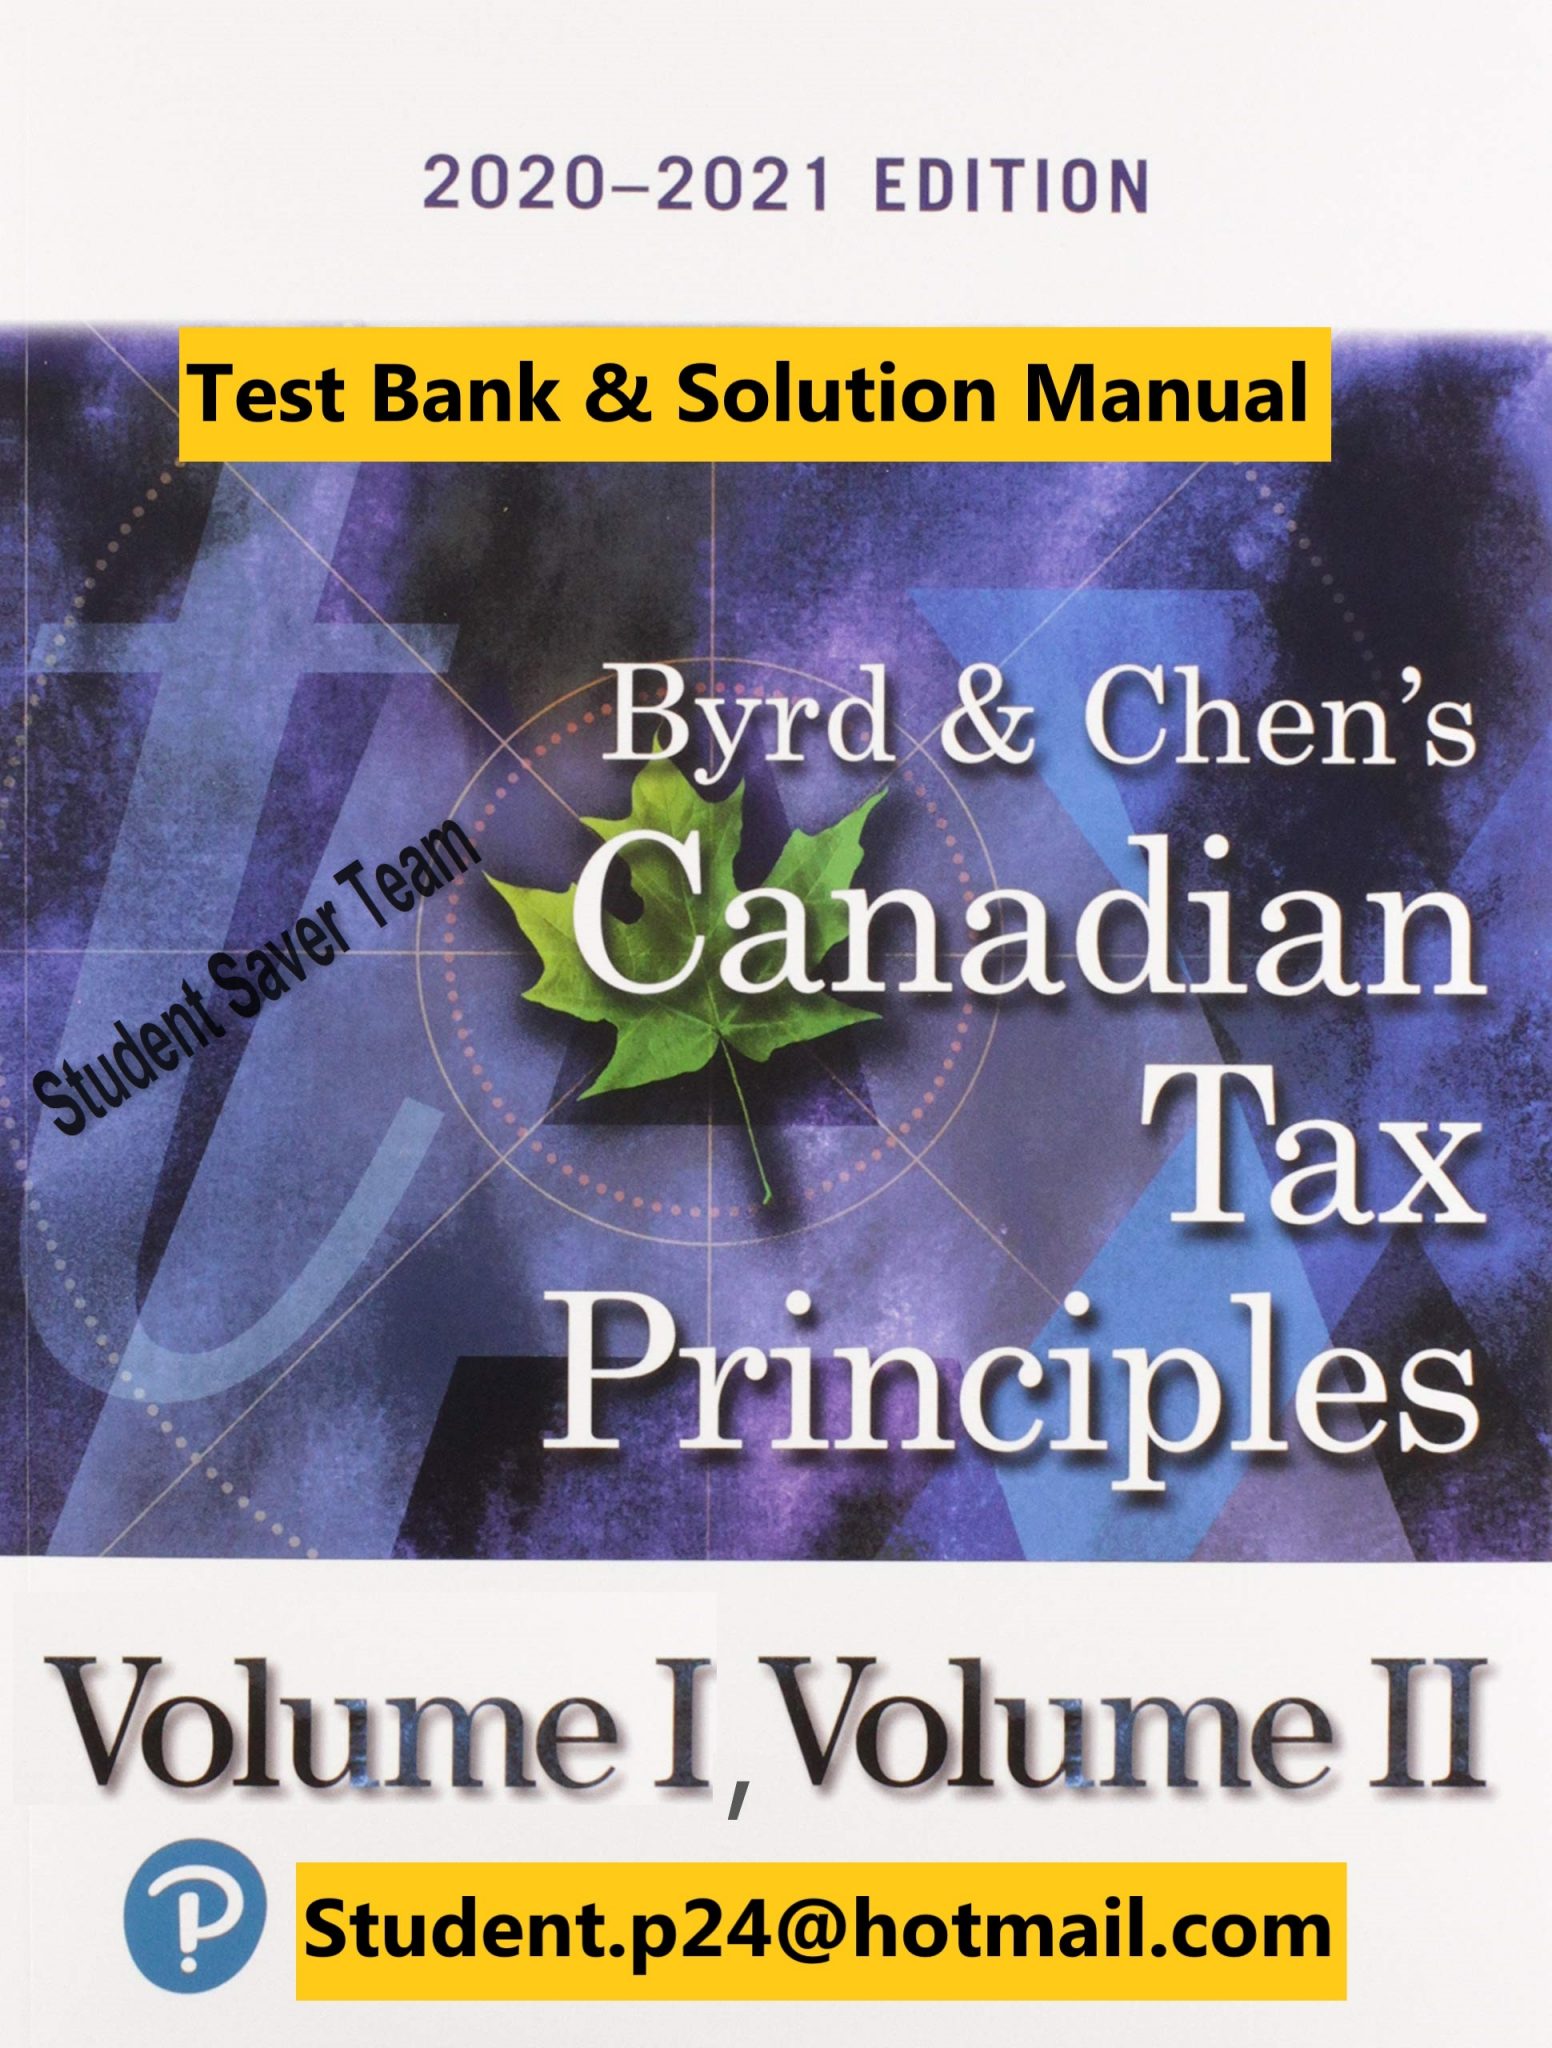 Byrd & Chen's Canadian Tax Principles, 20202021 Edition, Volumes I And